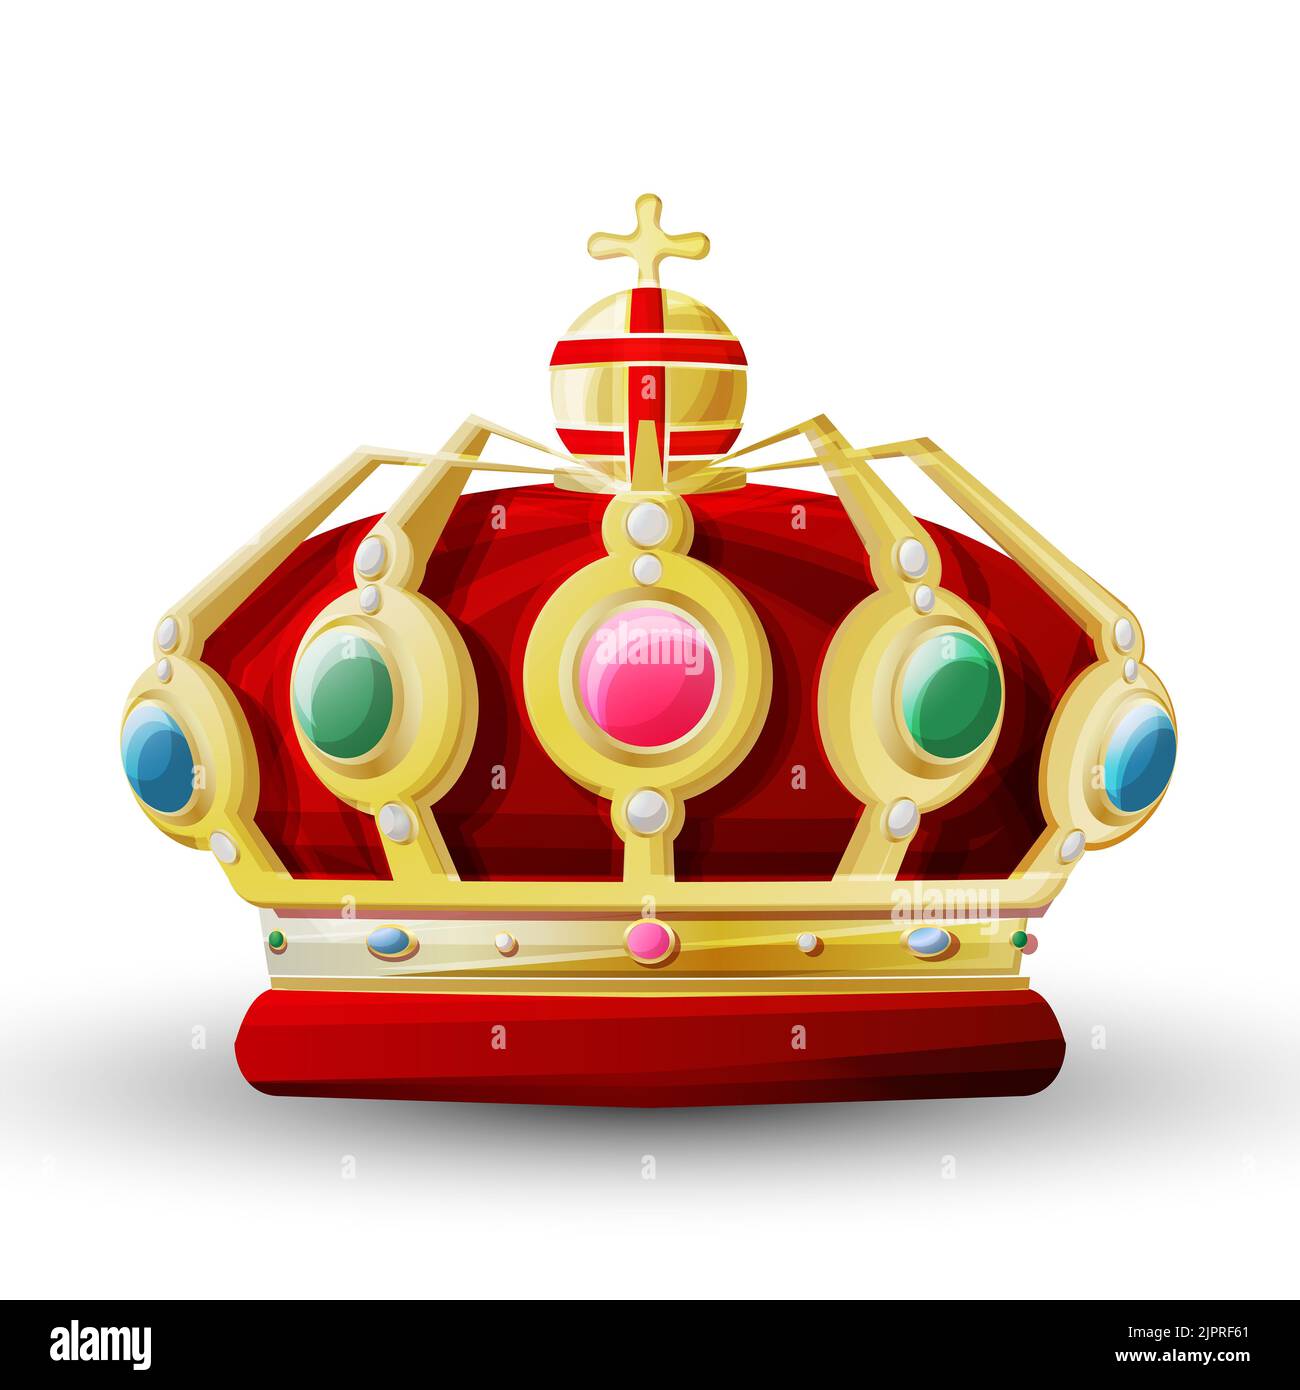 Royal golden crown for a king, vector object over white background Stock Photo